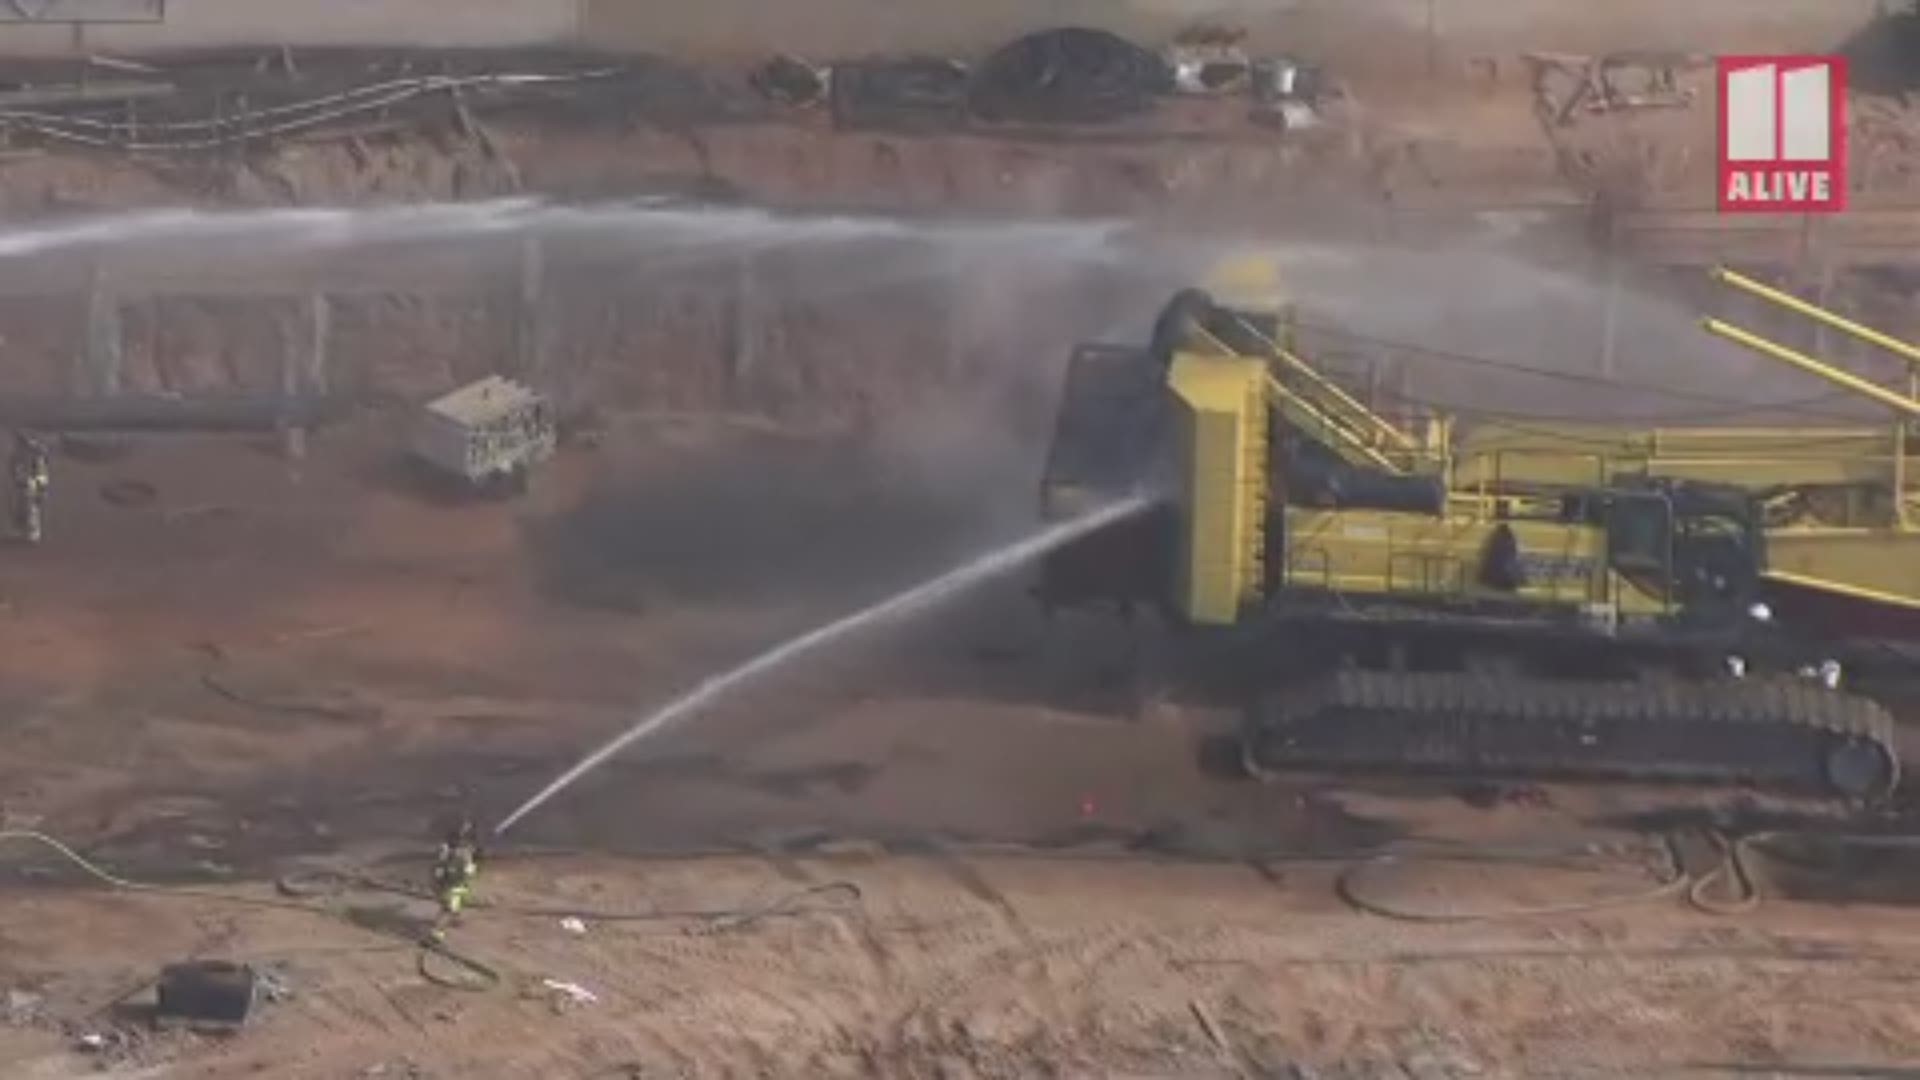 A crane collapsed in Alpharetta due to a fire and collapsed near Gwinnett Tech College. No one was hurt.